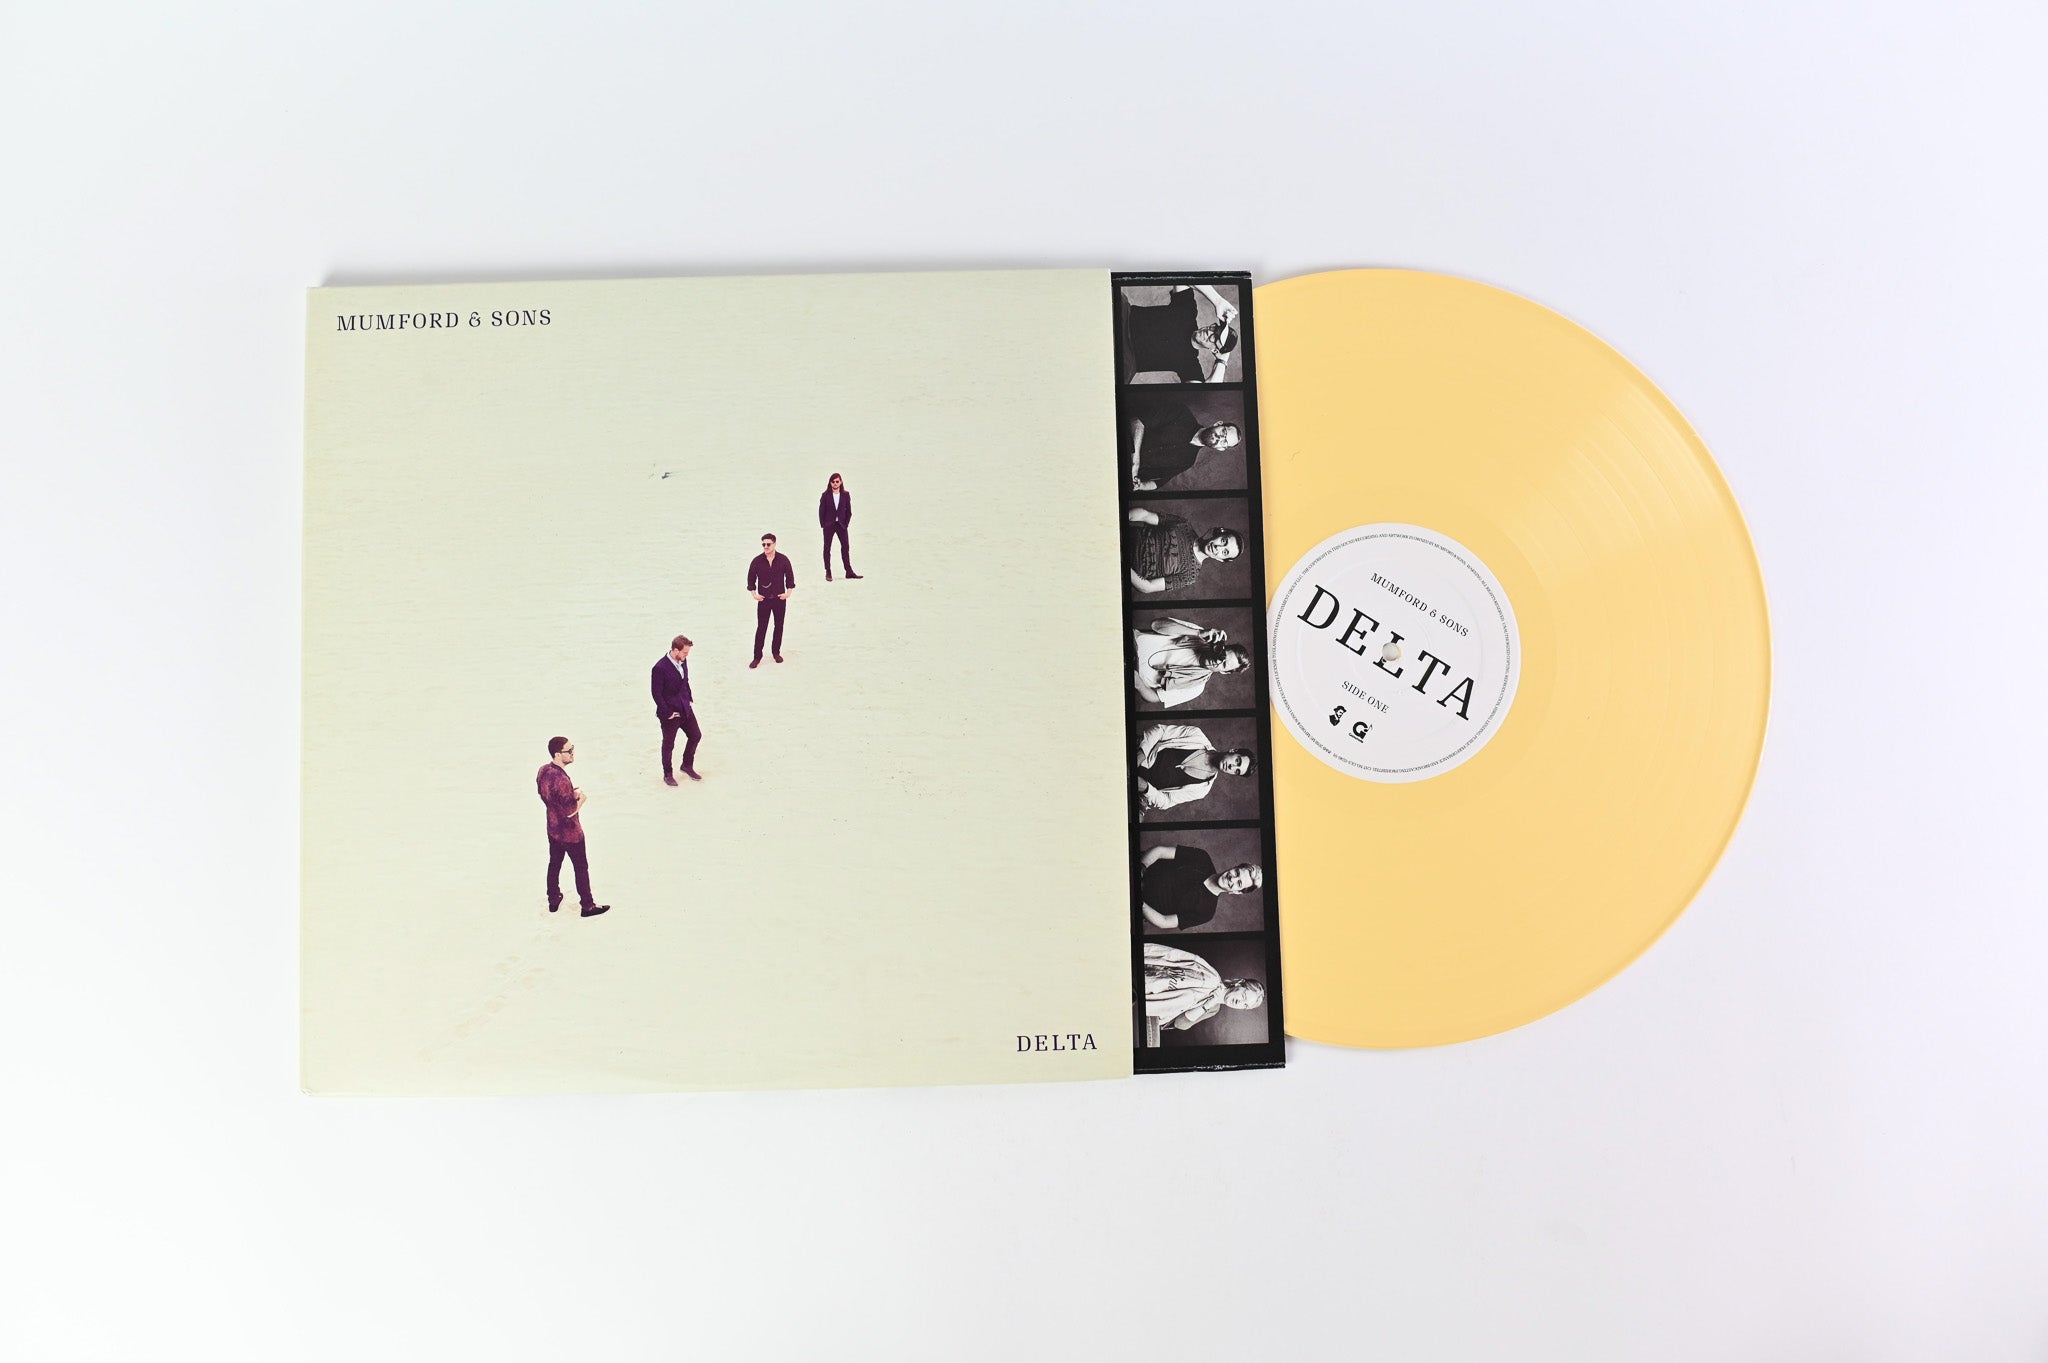 Mumford & Sons - Delta on Glassnote - Sand Colored Vinyl